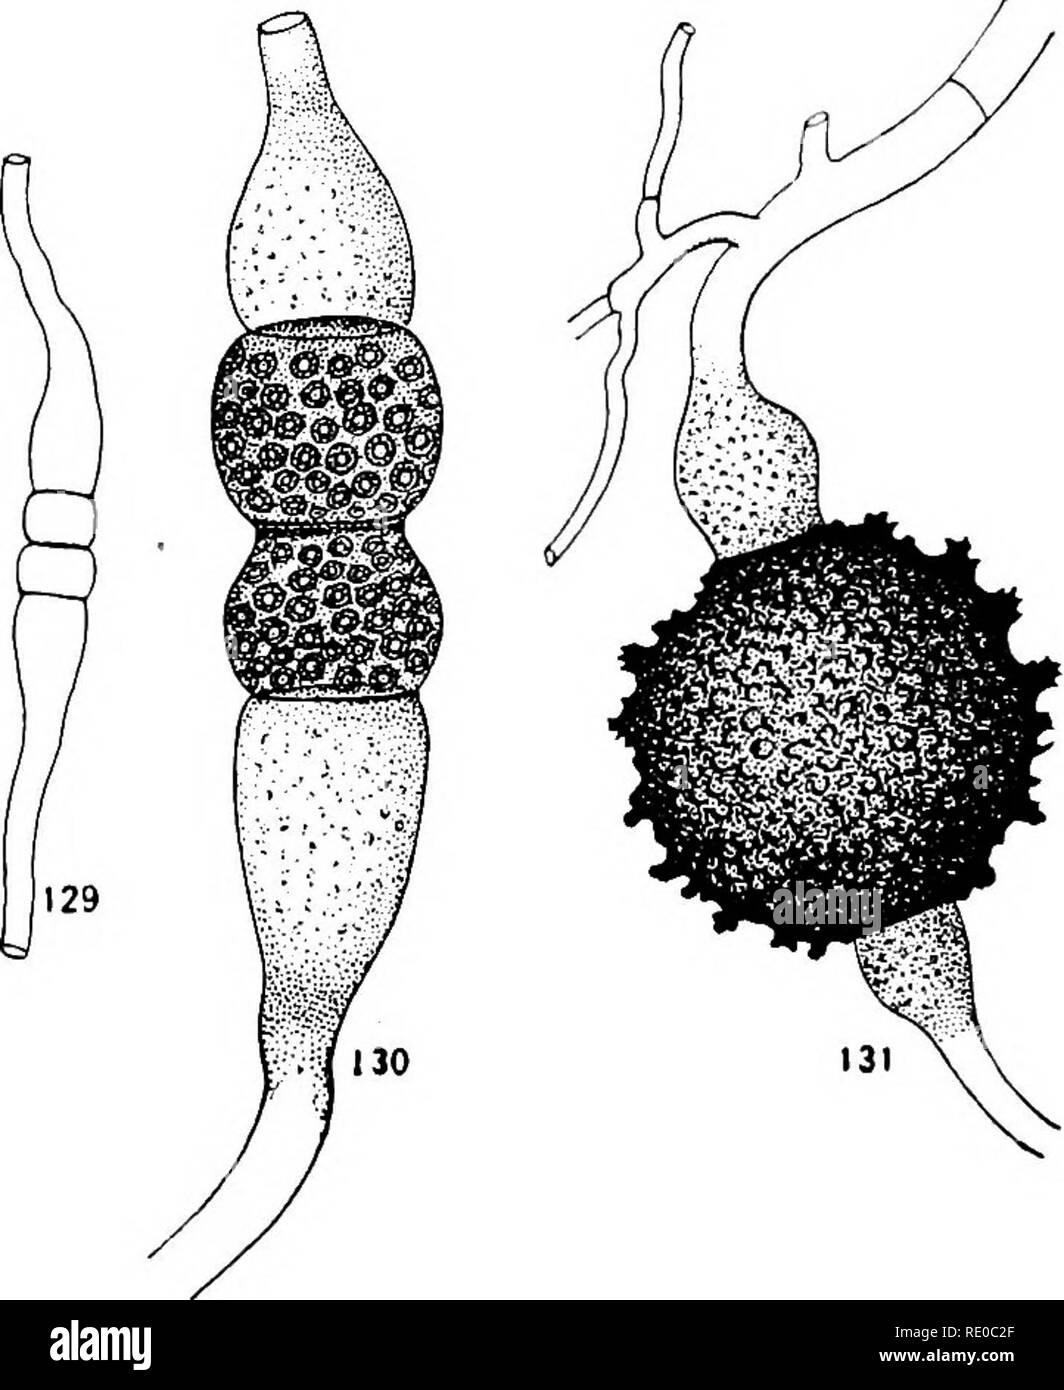 . Senescence and rejuvenescence. Age; Reproduction. Figs. 128-131.—Gametes of fungi: Fig. 128, oogonium of SaproUgnia, contain- ing several eggs and antheridial tube piercing its wall in fertilization (from Coulter, etc., '10); Figs. 129-131, three stages in formation and union of gametes in Mucor (from Brefeld, '72). the spermatogenous cells undergo numerous divisions and finally give rise to spermatozoids. The female gamete, on the other hand, is not separated from other non-gametic cells until the last division preceding fertihzation. Figs. 133-39 show the development of the archegonium of  Stock Photo